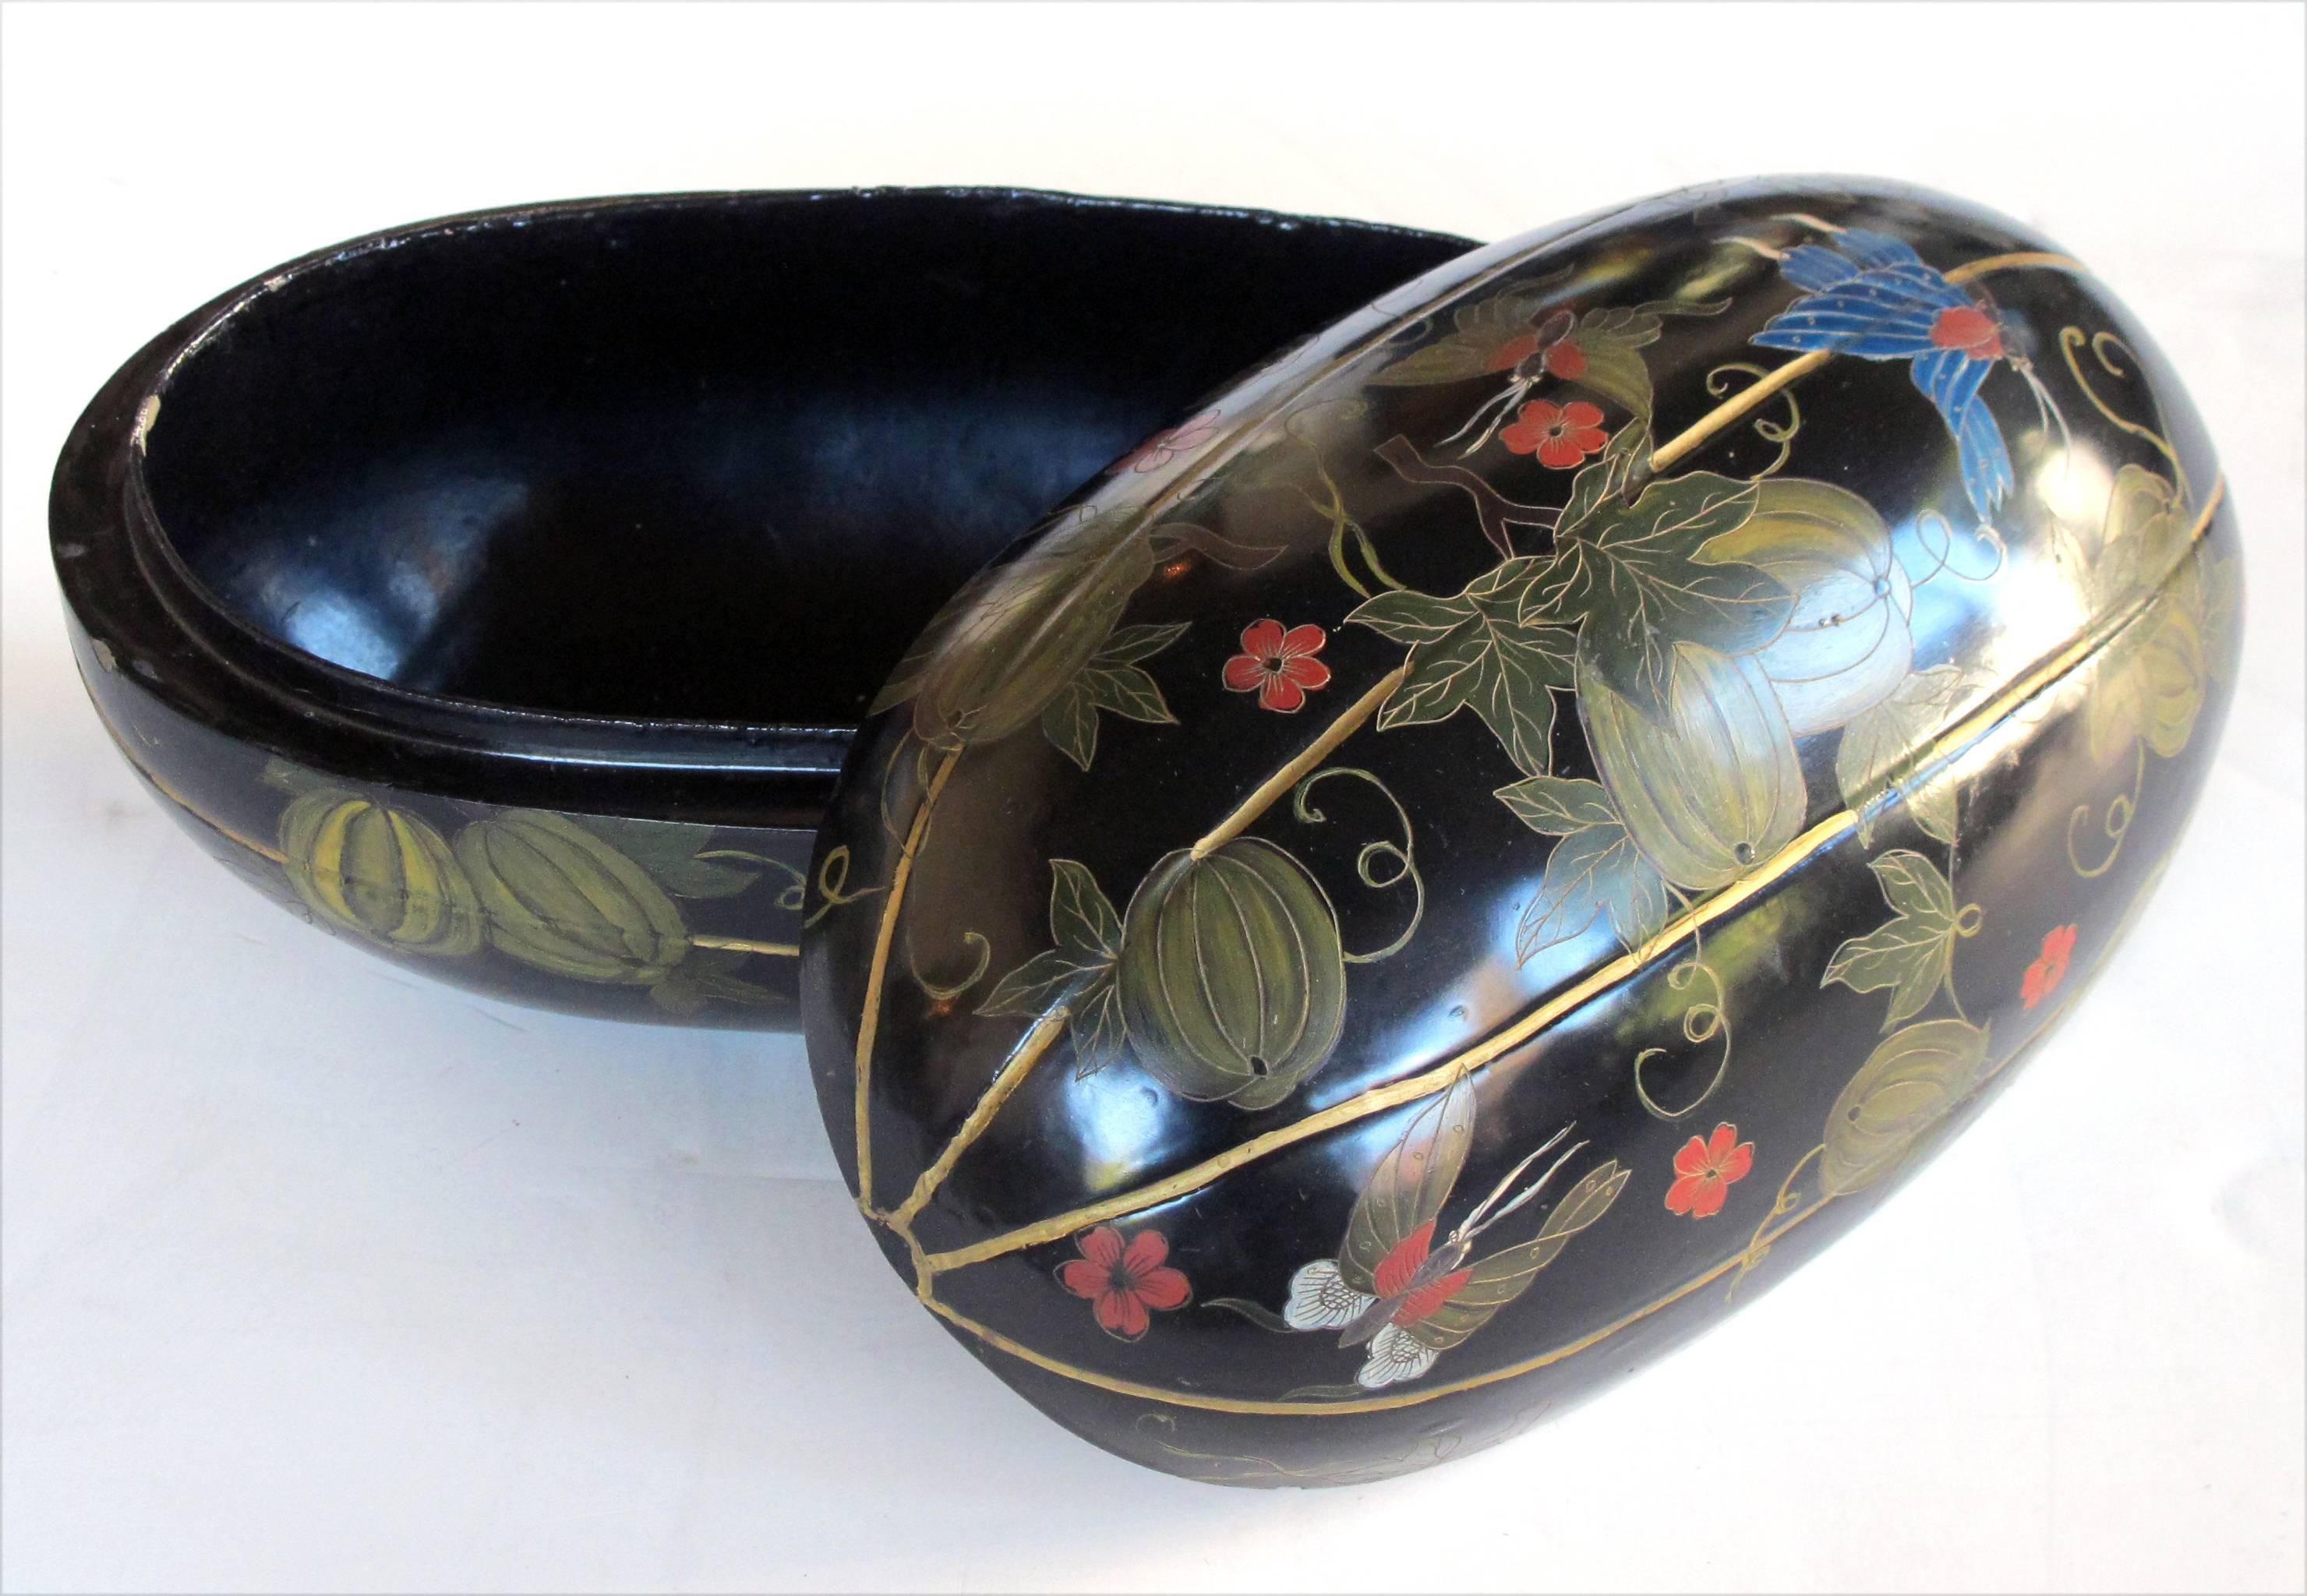 A delightful Japanese black lacquered hand-painted gourd-form box; the oblong lidded box adorned overall with delicate butterflies amid a meandering floral vine laden with plump gourds.